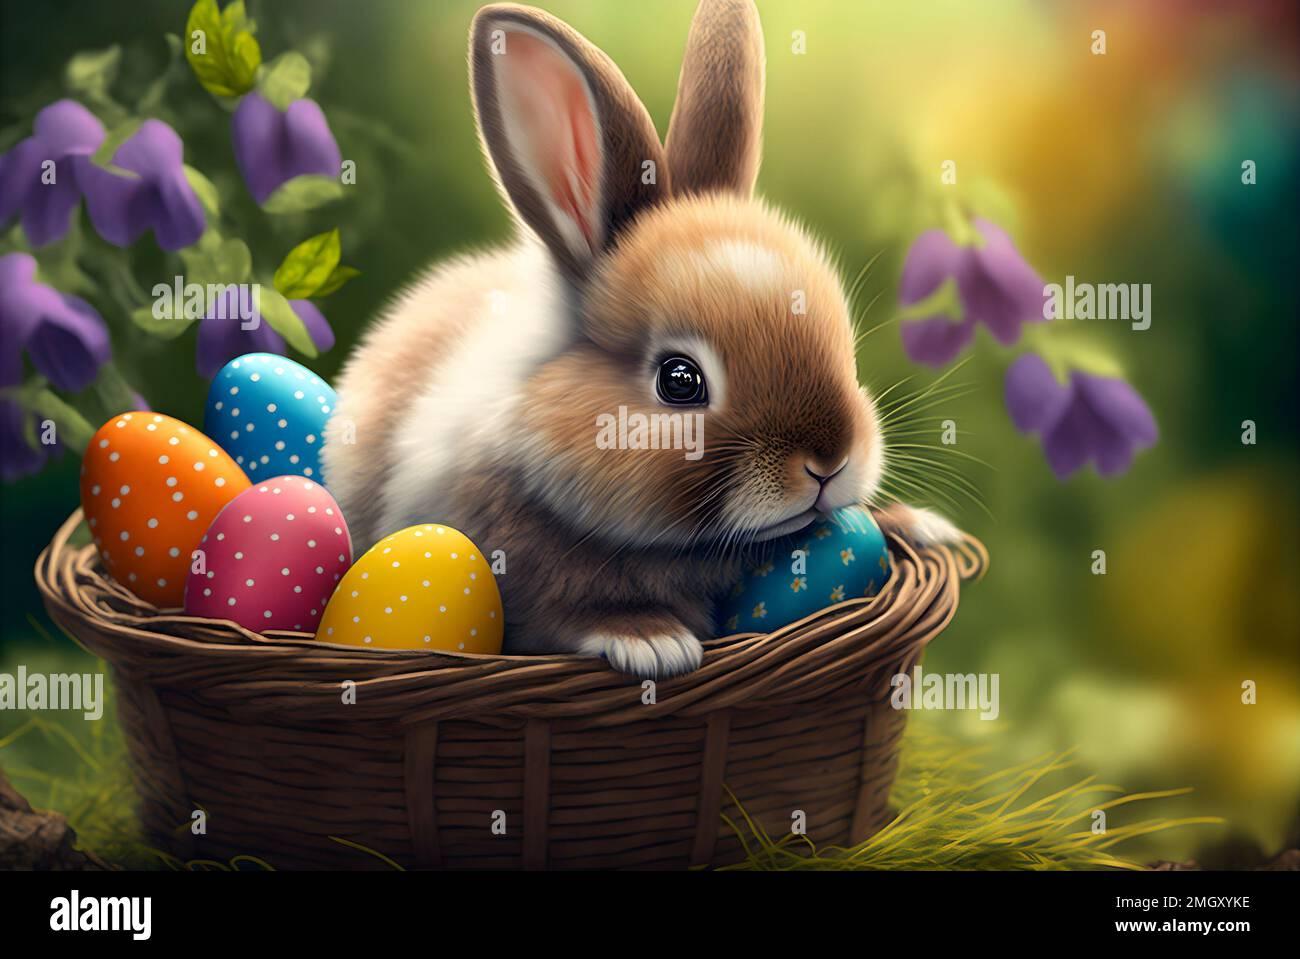 Cute Easter Bunny Sitting In Basket With Colorful Painted Eggs